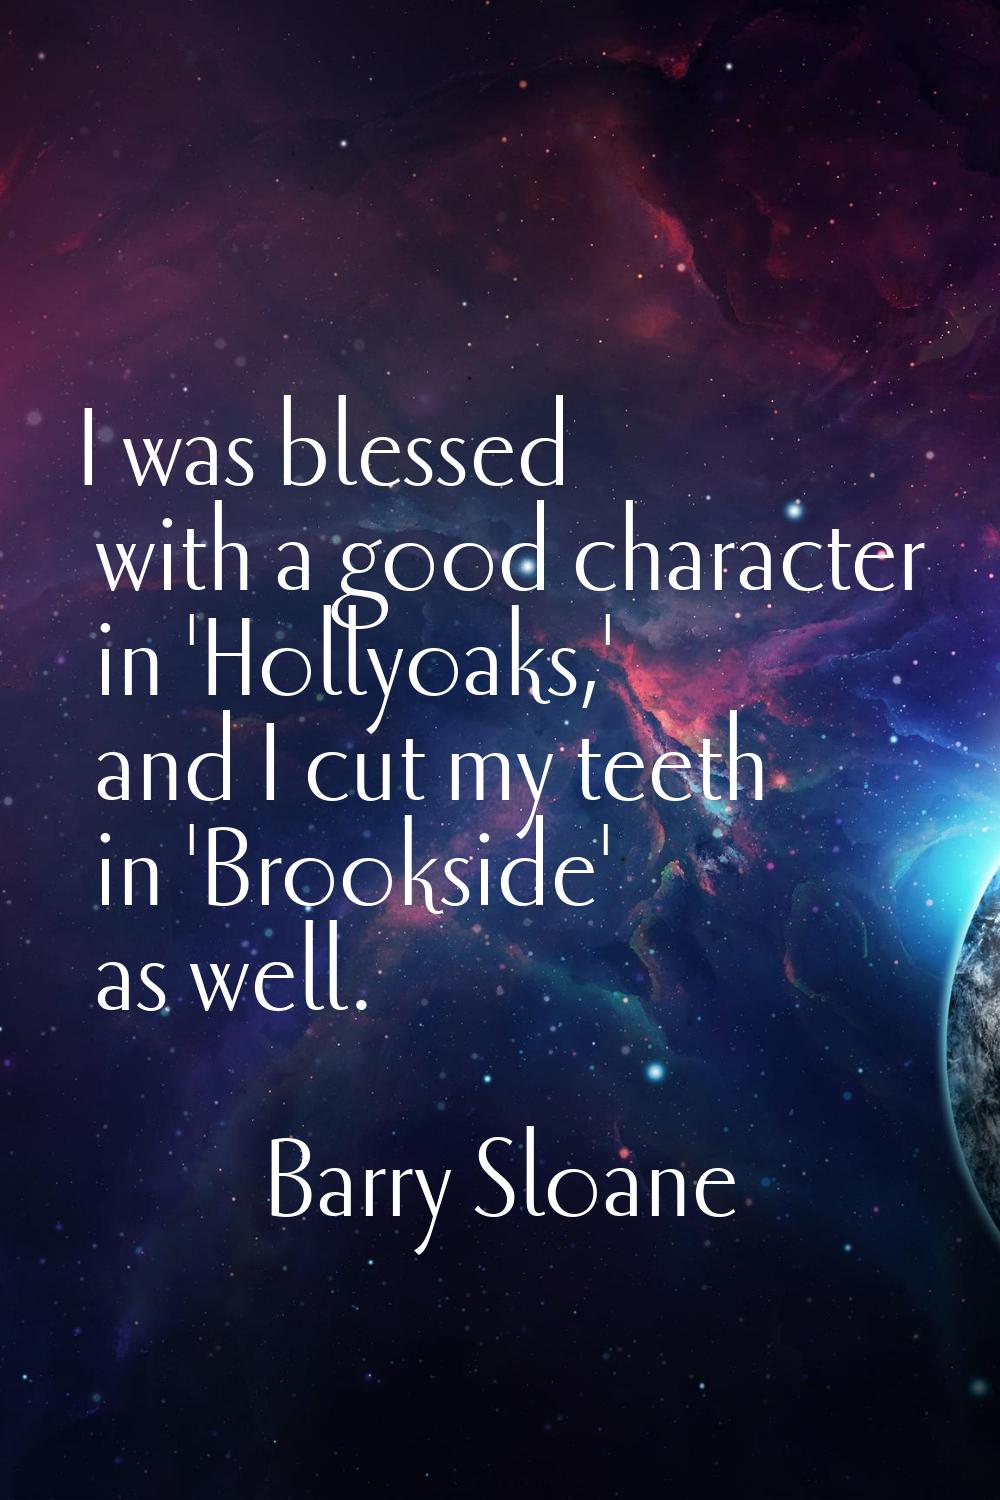 I was blessed with a good character in 'Hollyoaks,' and I cut my teeth in 'Brookside' as well.